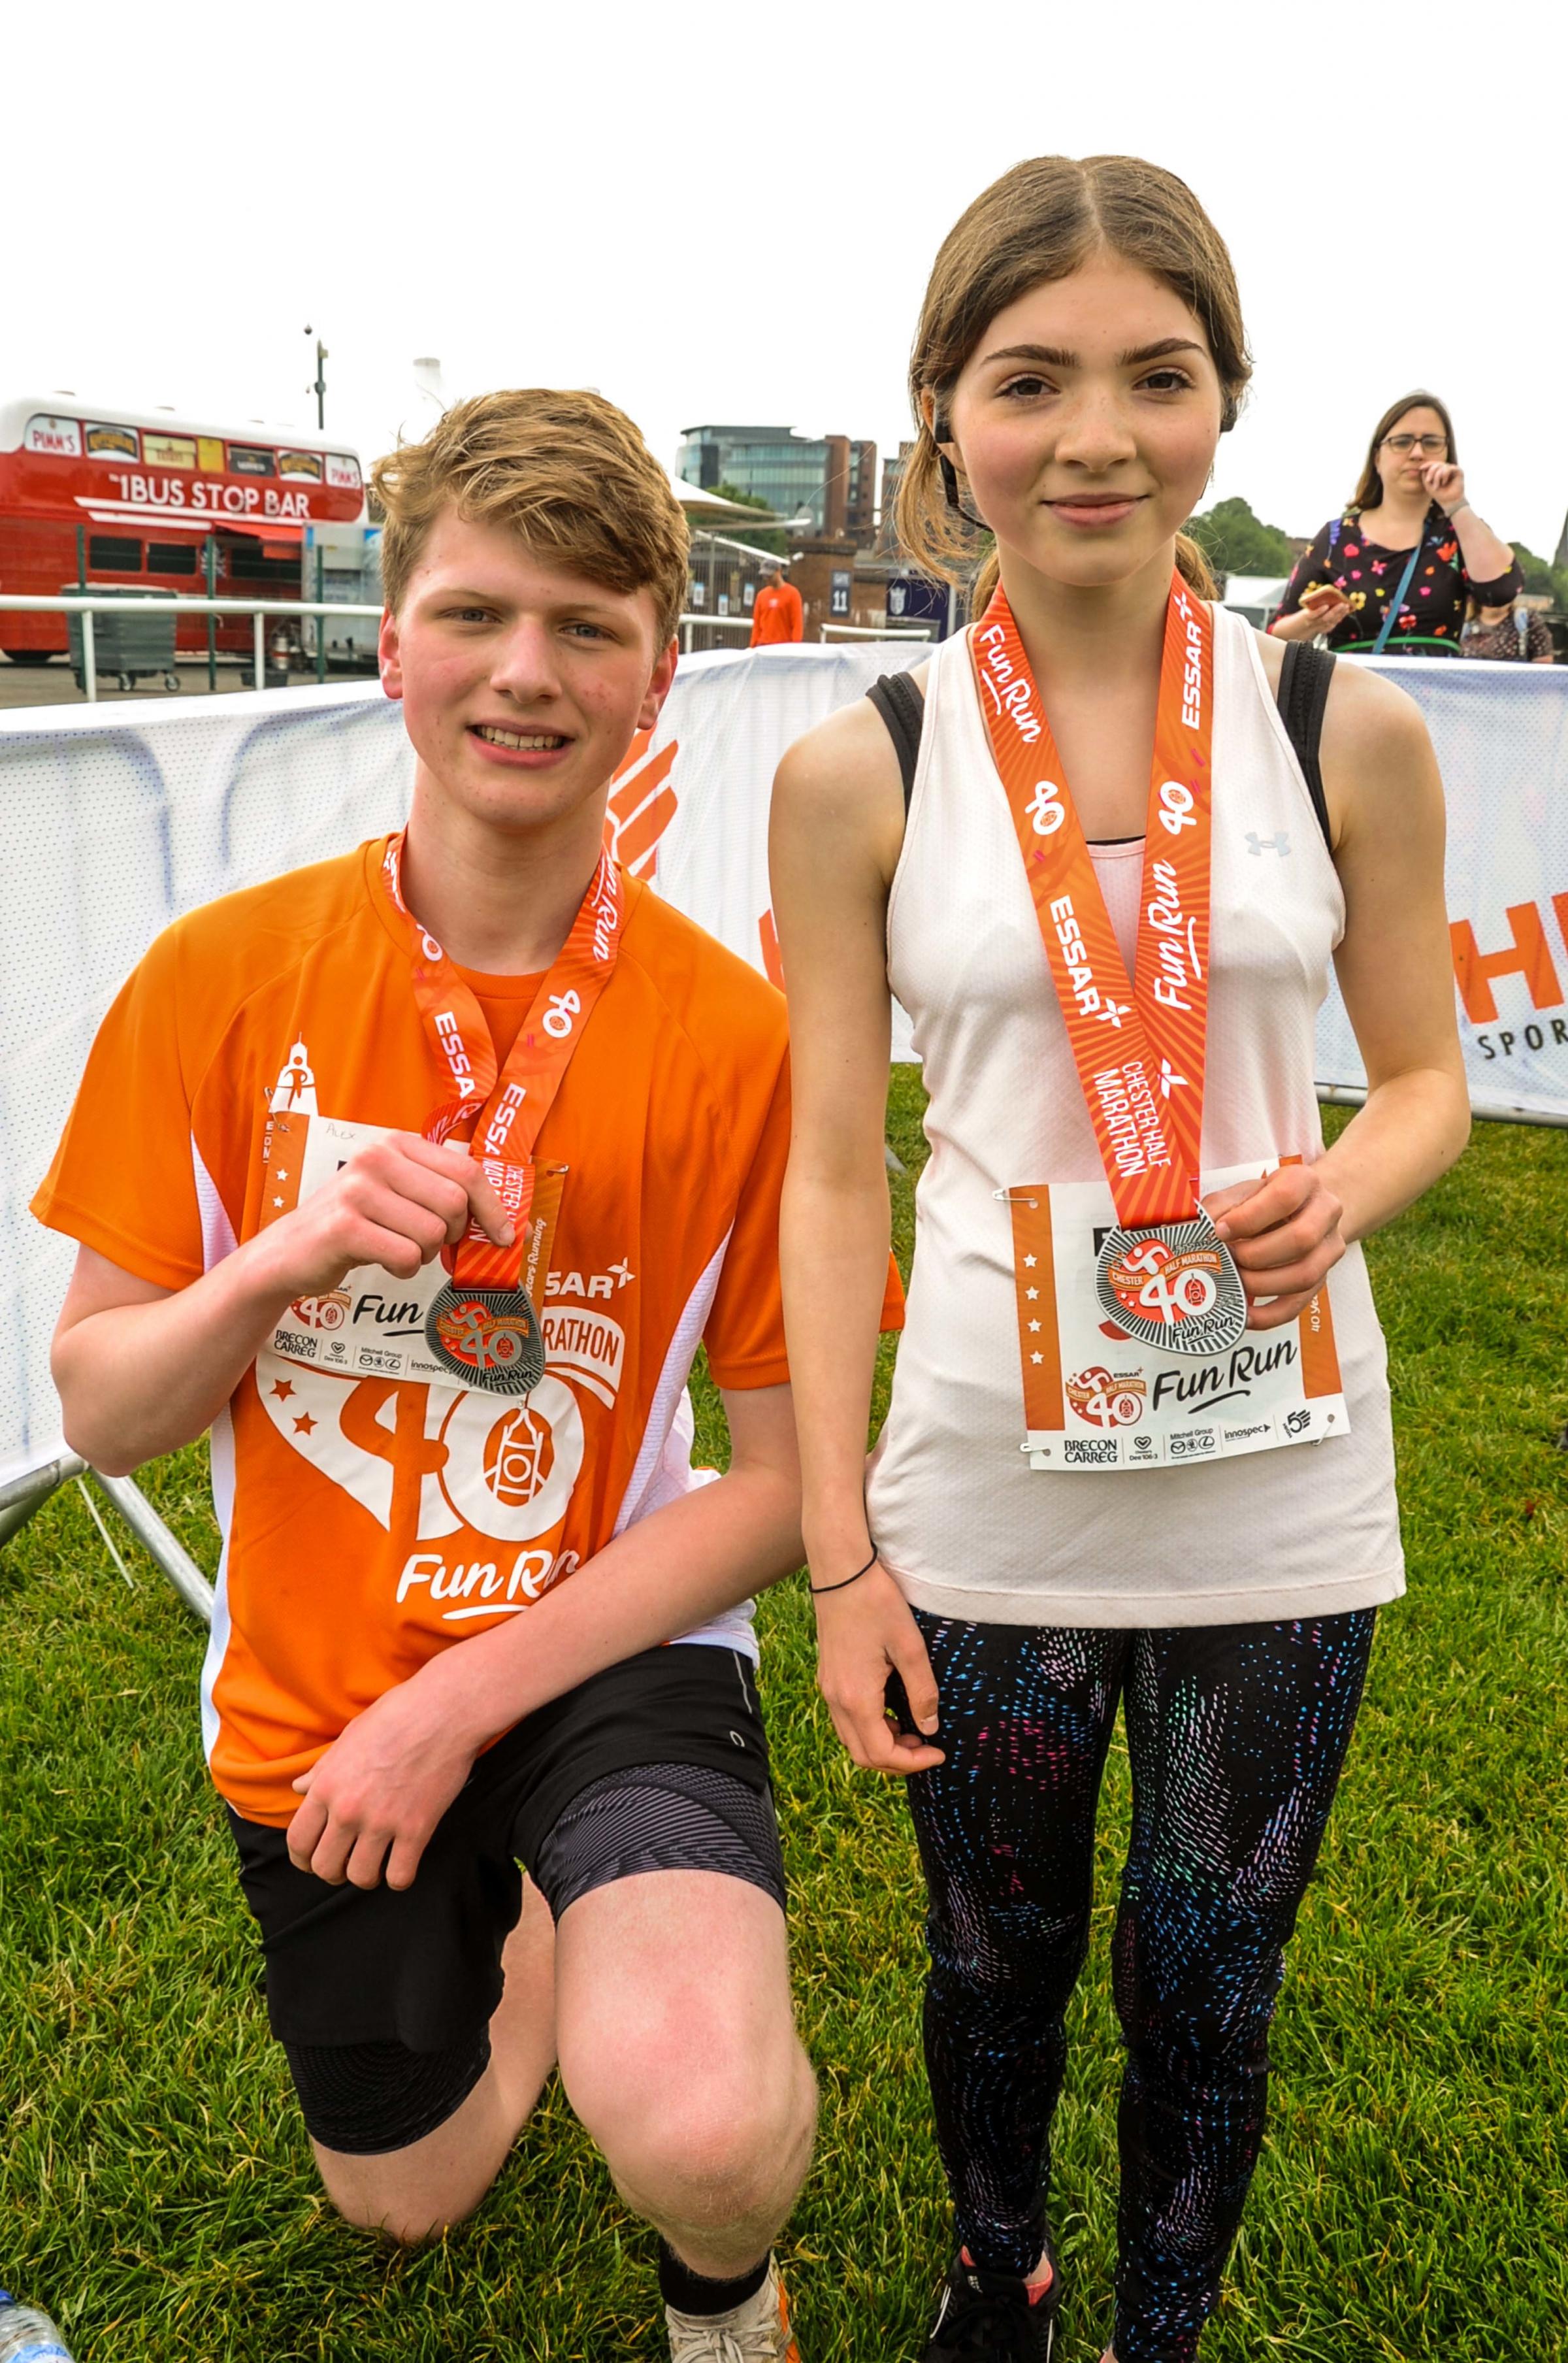 Winners of the Fun Run Alex Young, age 16 and Lucy Hellingsworth, 13.